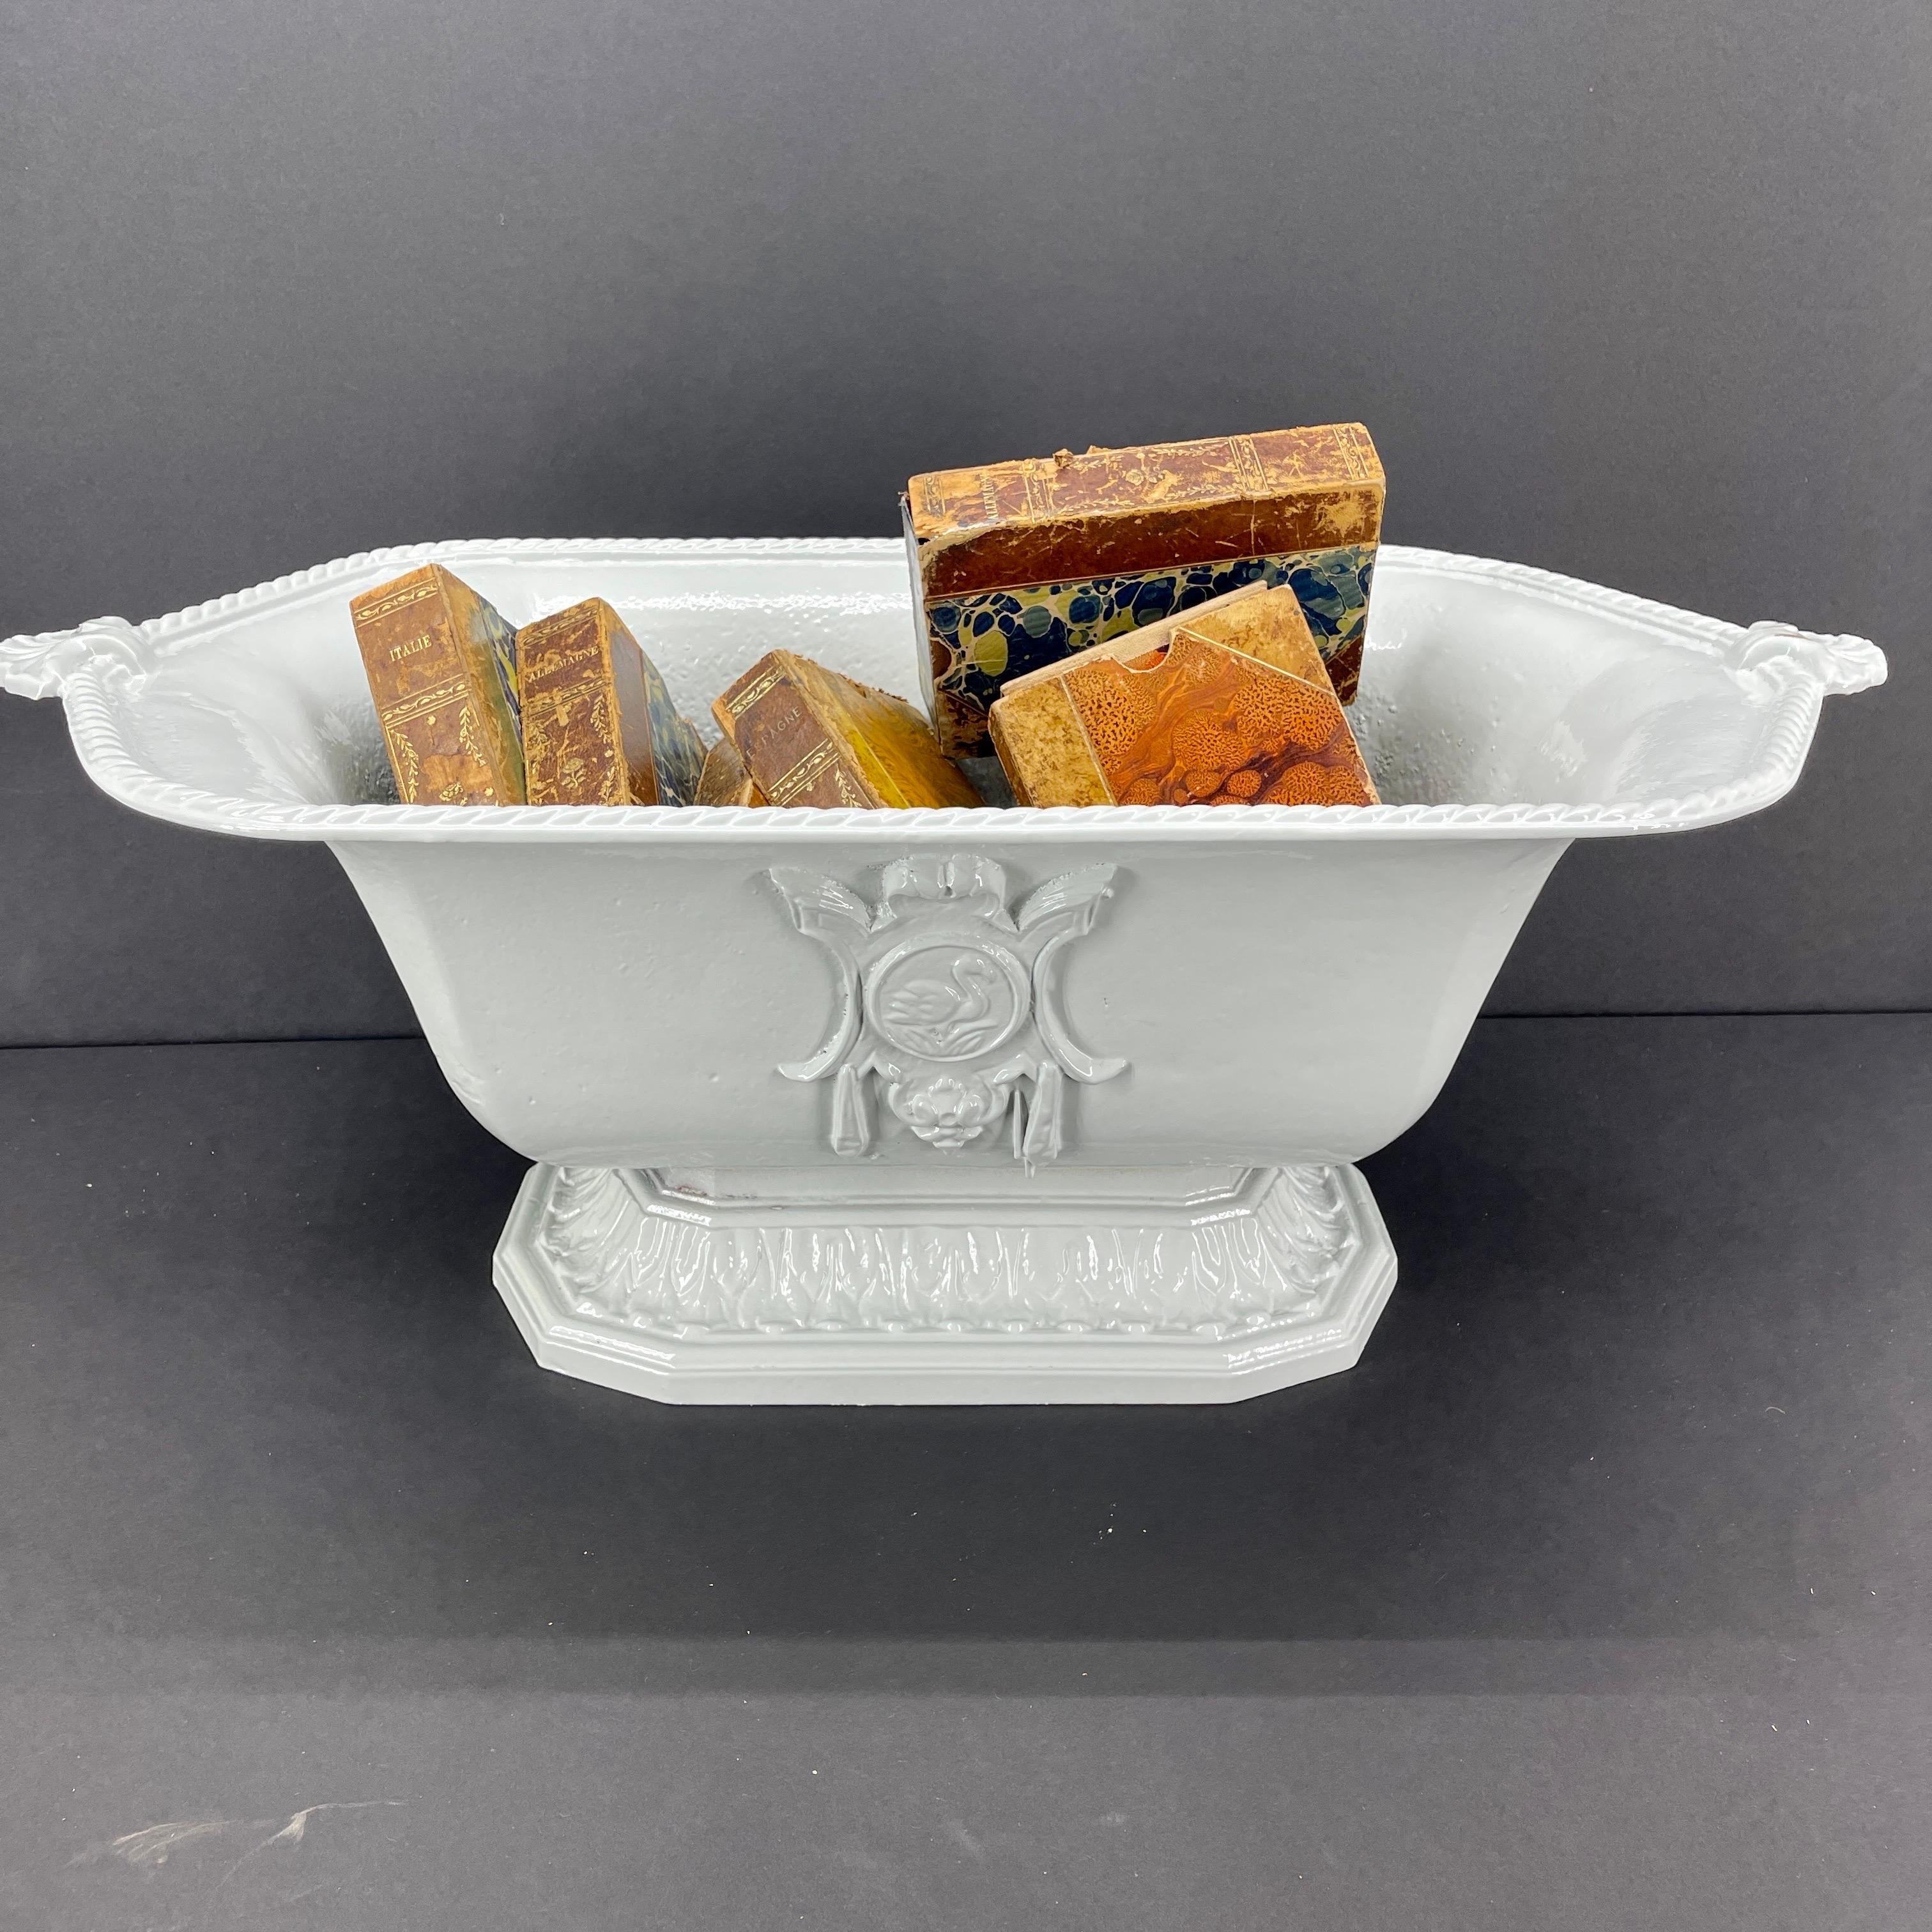 19th Century Cast Iron Planter Jardiniere, Powder-Coated in Snowbird White  

This neutral colored oblong planter features handles above fluted scrolling decorated sides. The planter is raised up on a stepped base and features a bird emblem on one